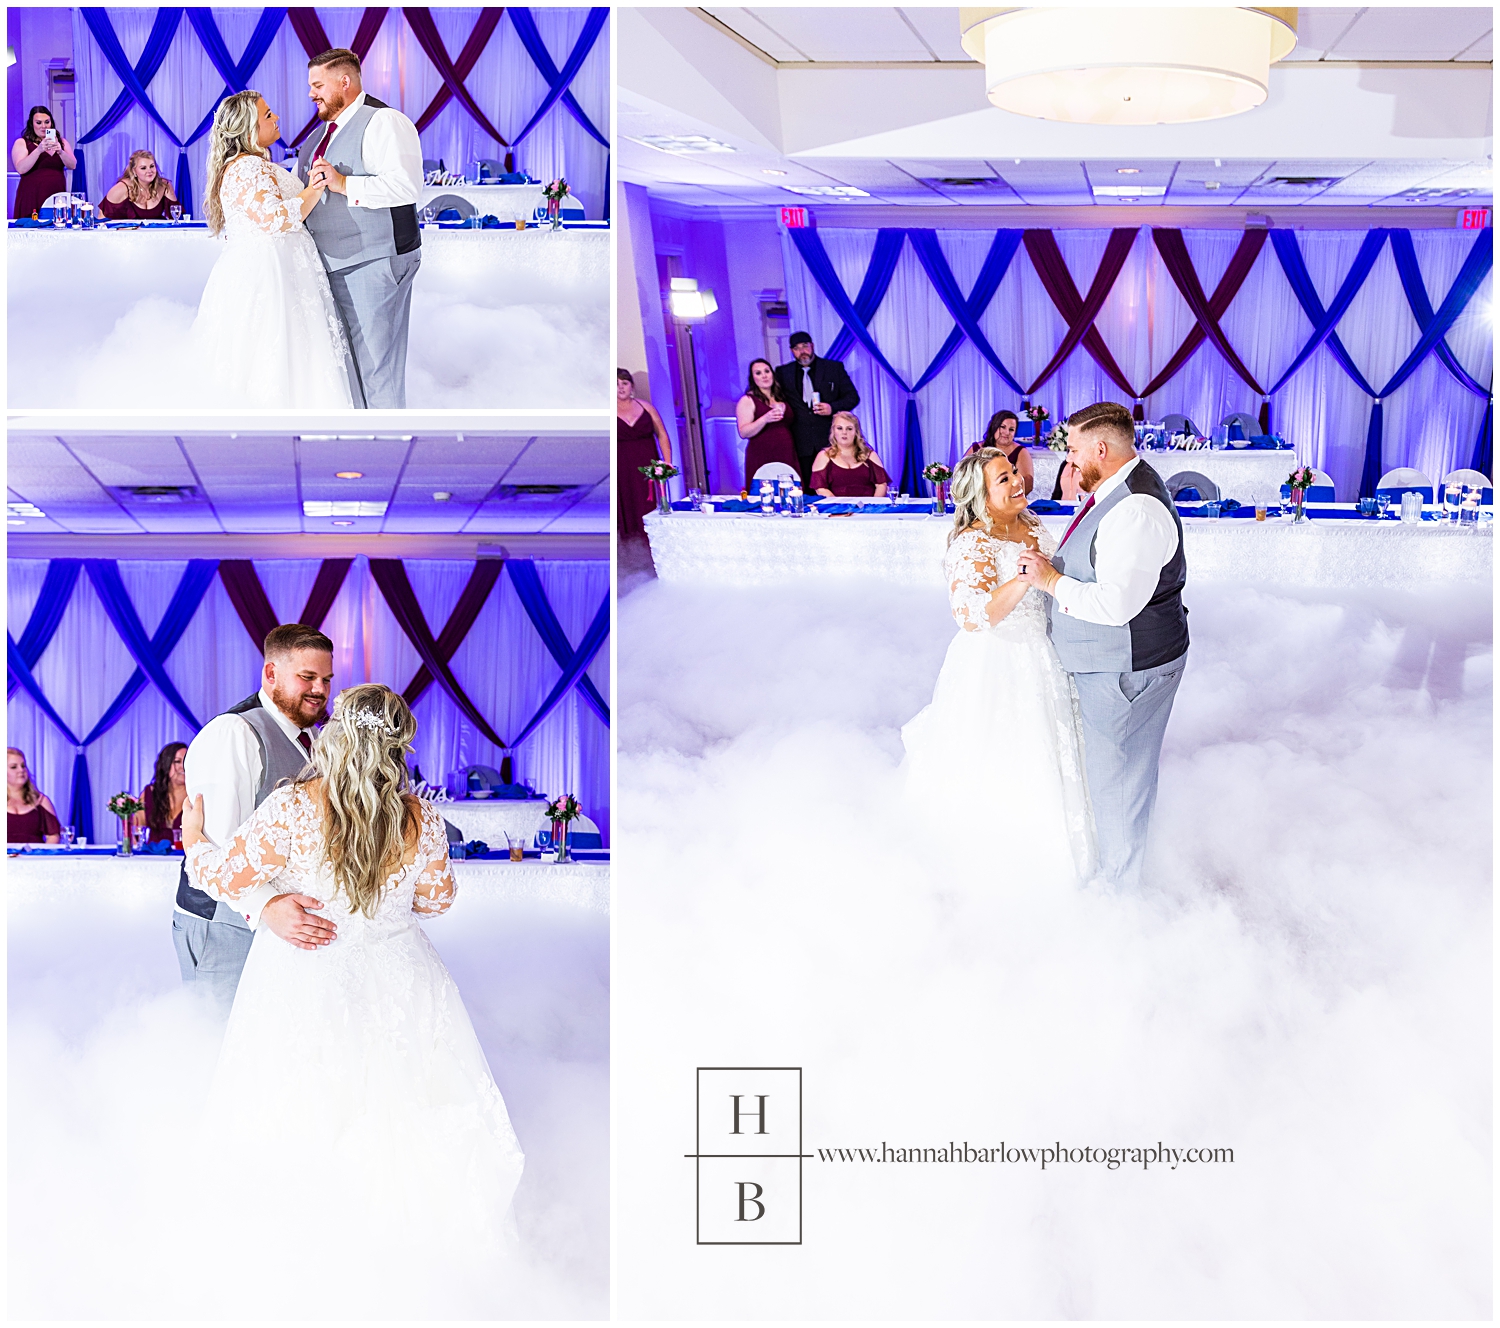 Bride and Groom Dancing on a Cloud at Wedding Reception